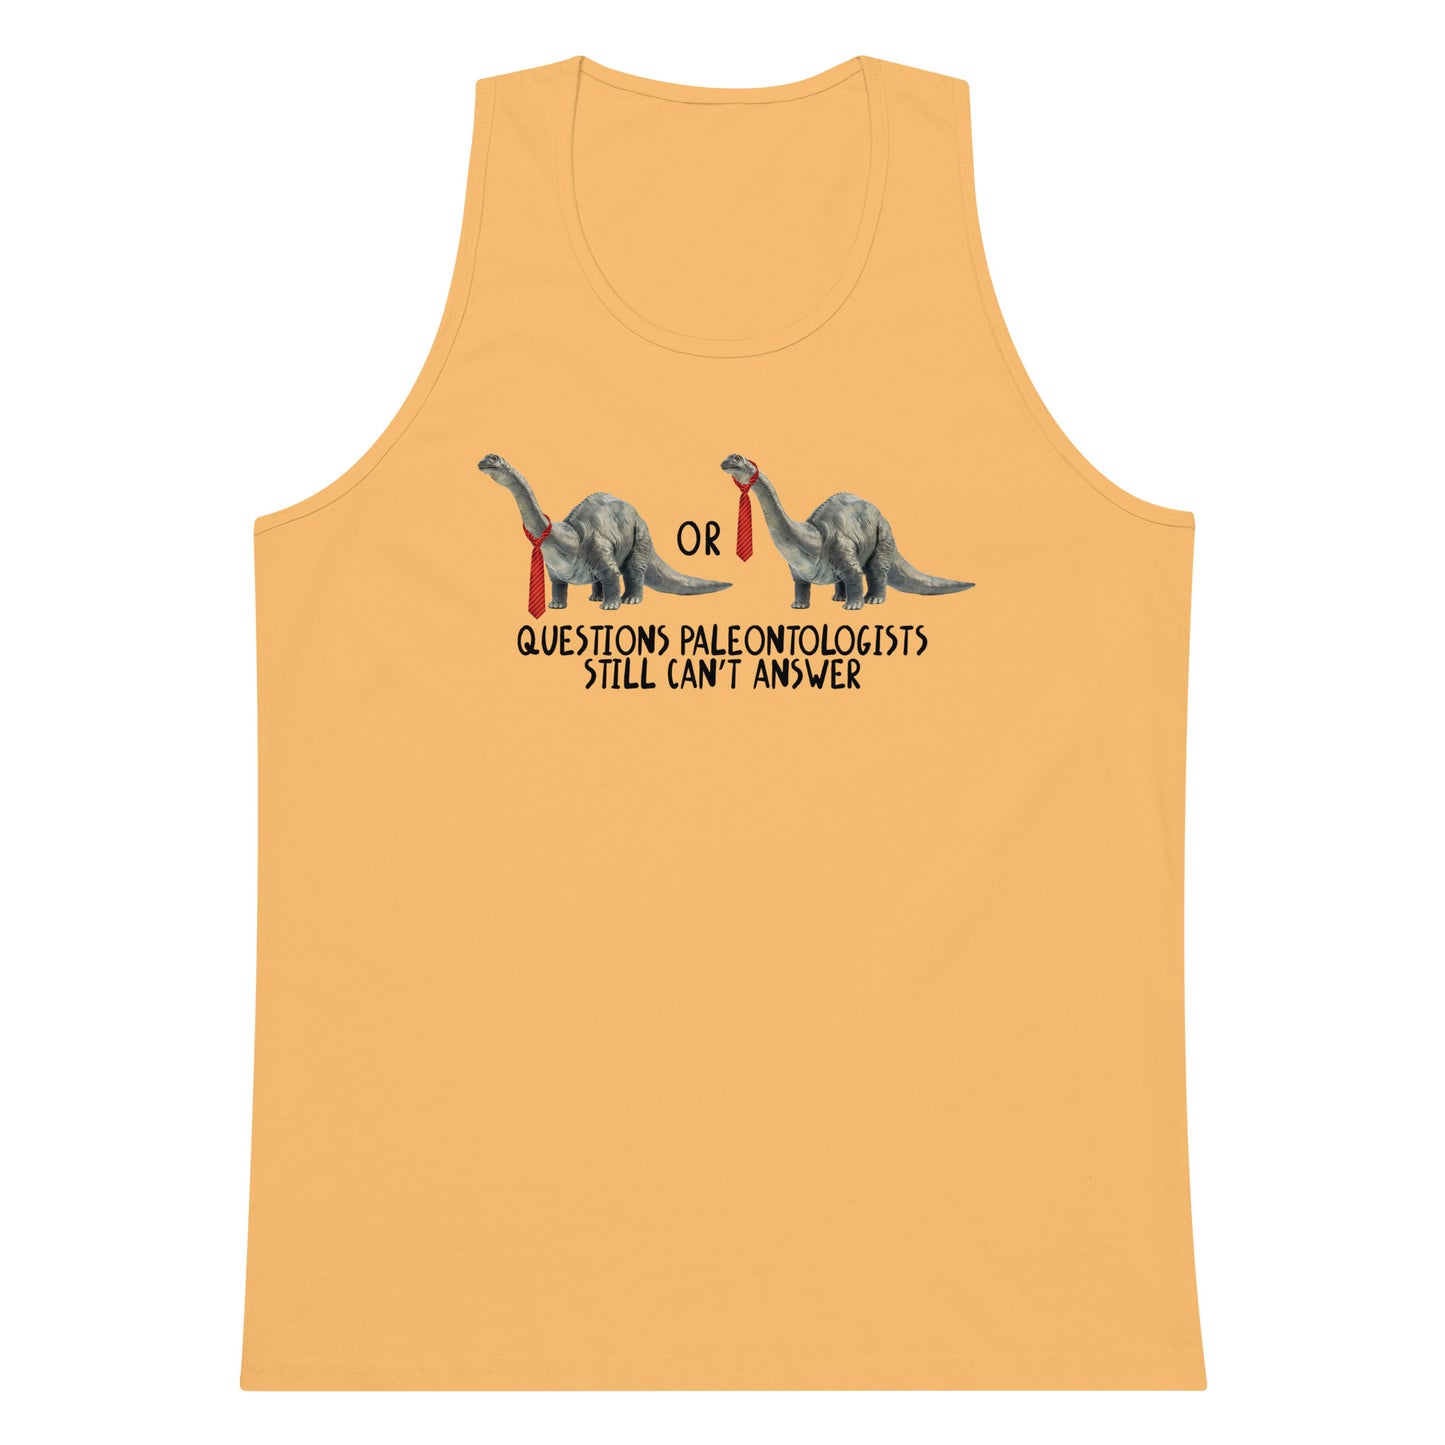 Questions Paleontologists Still Can’t Answer tank top